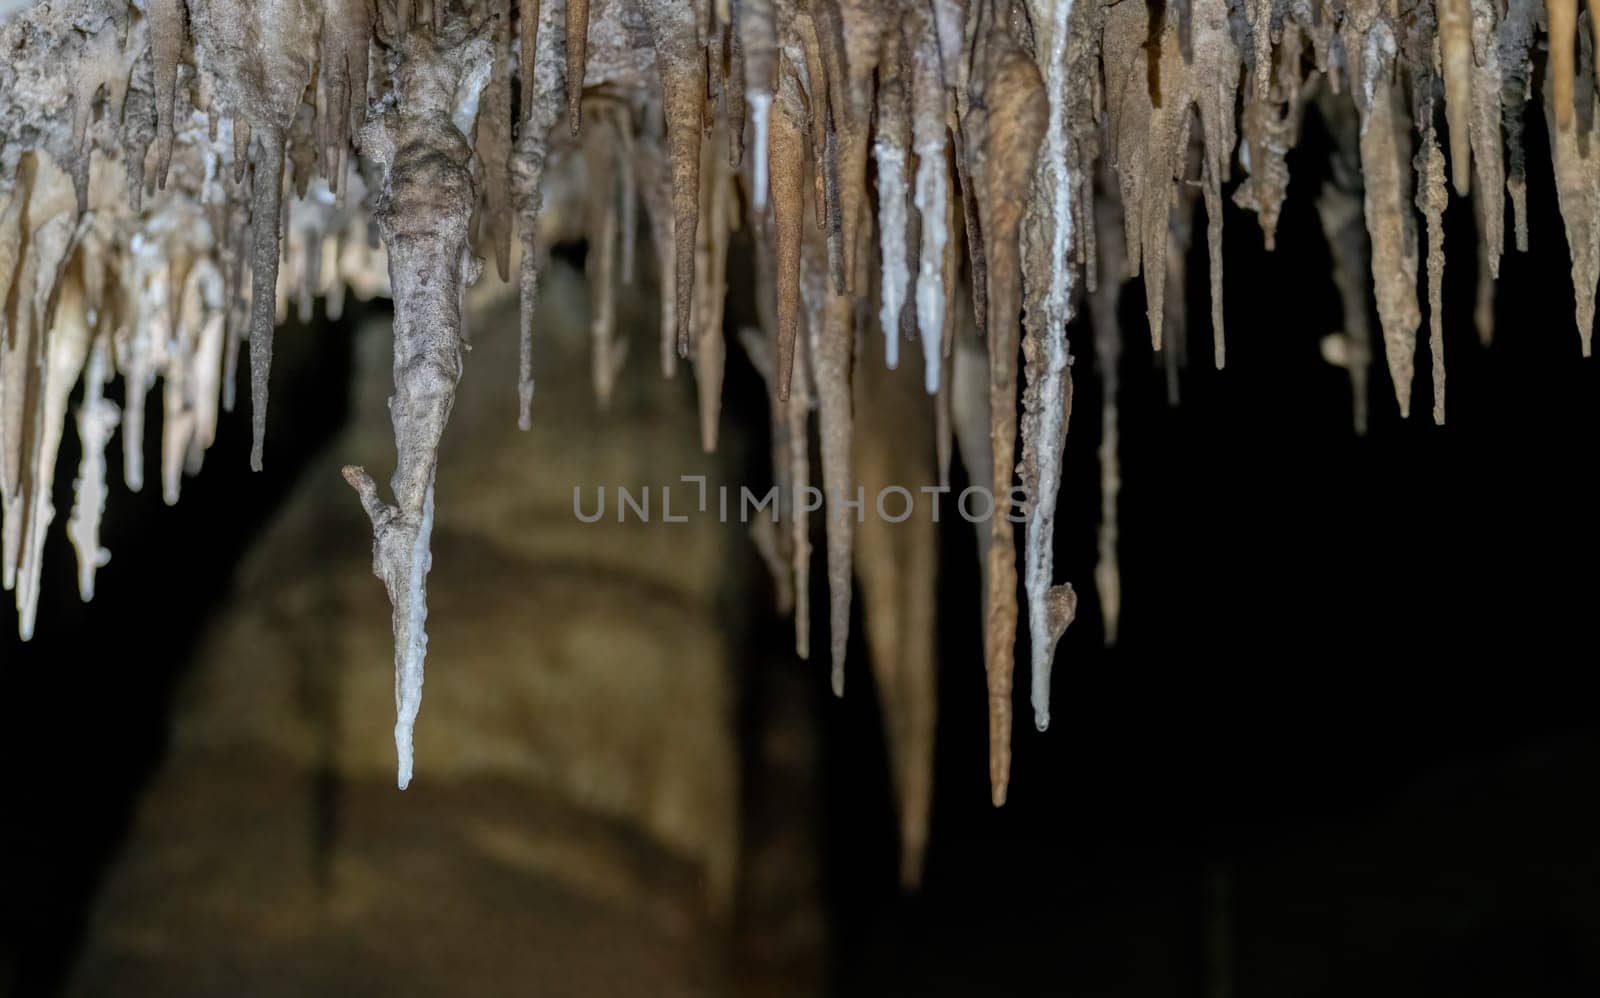 Enchanting Stalactites Hanging from Cave Ceiling with Space for Text by FerradalFCG